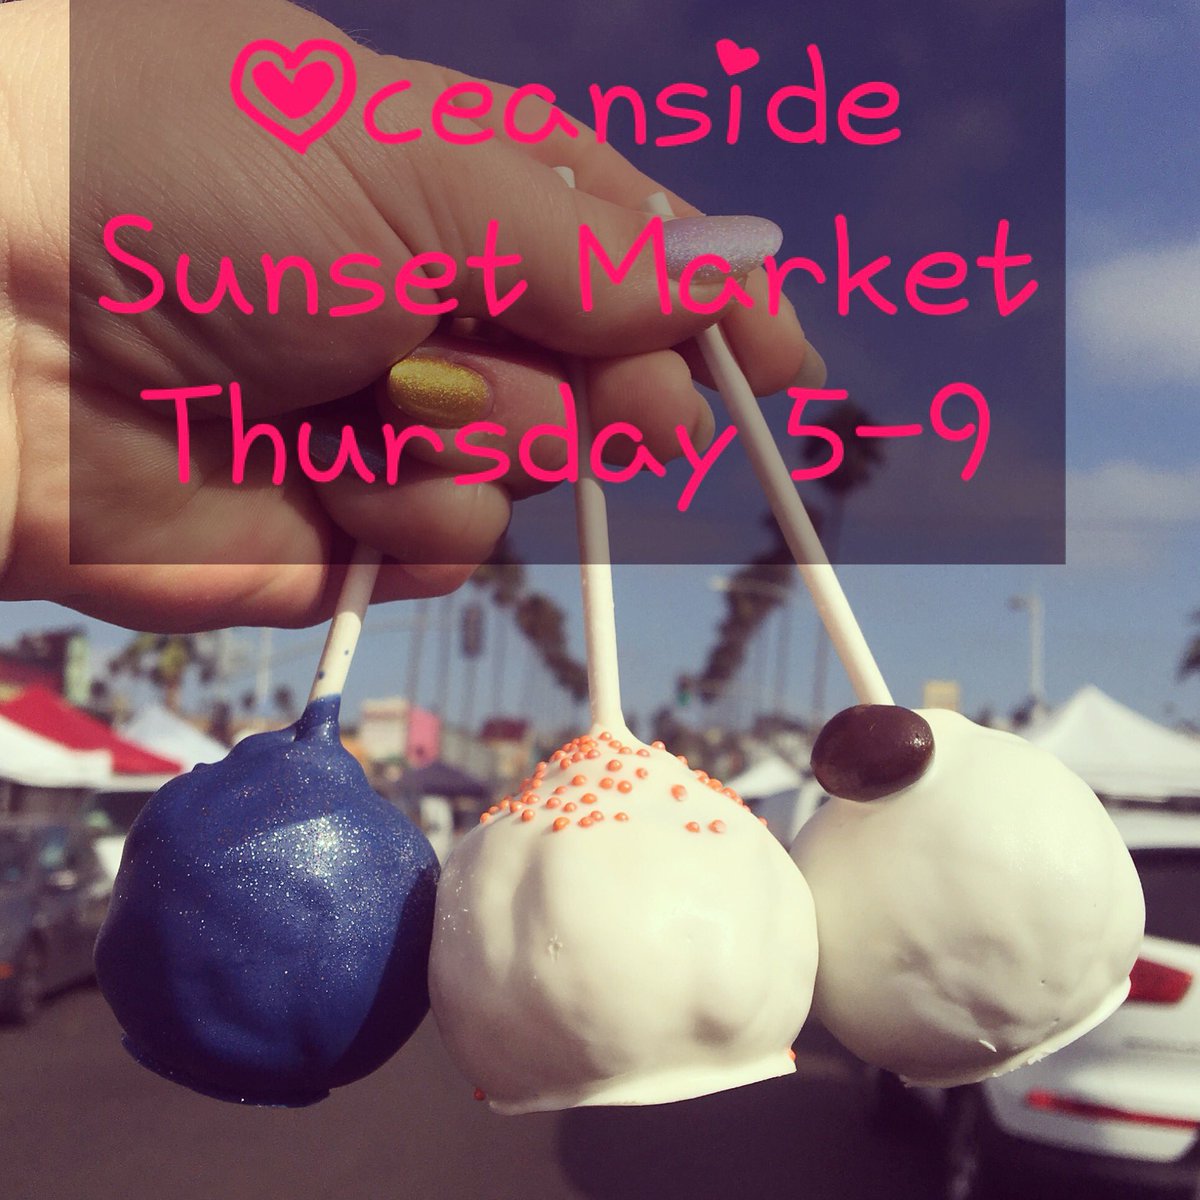 The #sun is going down and there's a #beautiful breeze at the #oceansidesunsetmarket today 5-9! Come get some #cakepops #shopsmallsandiego